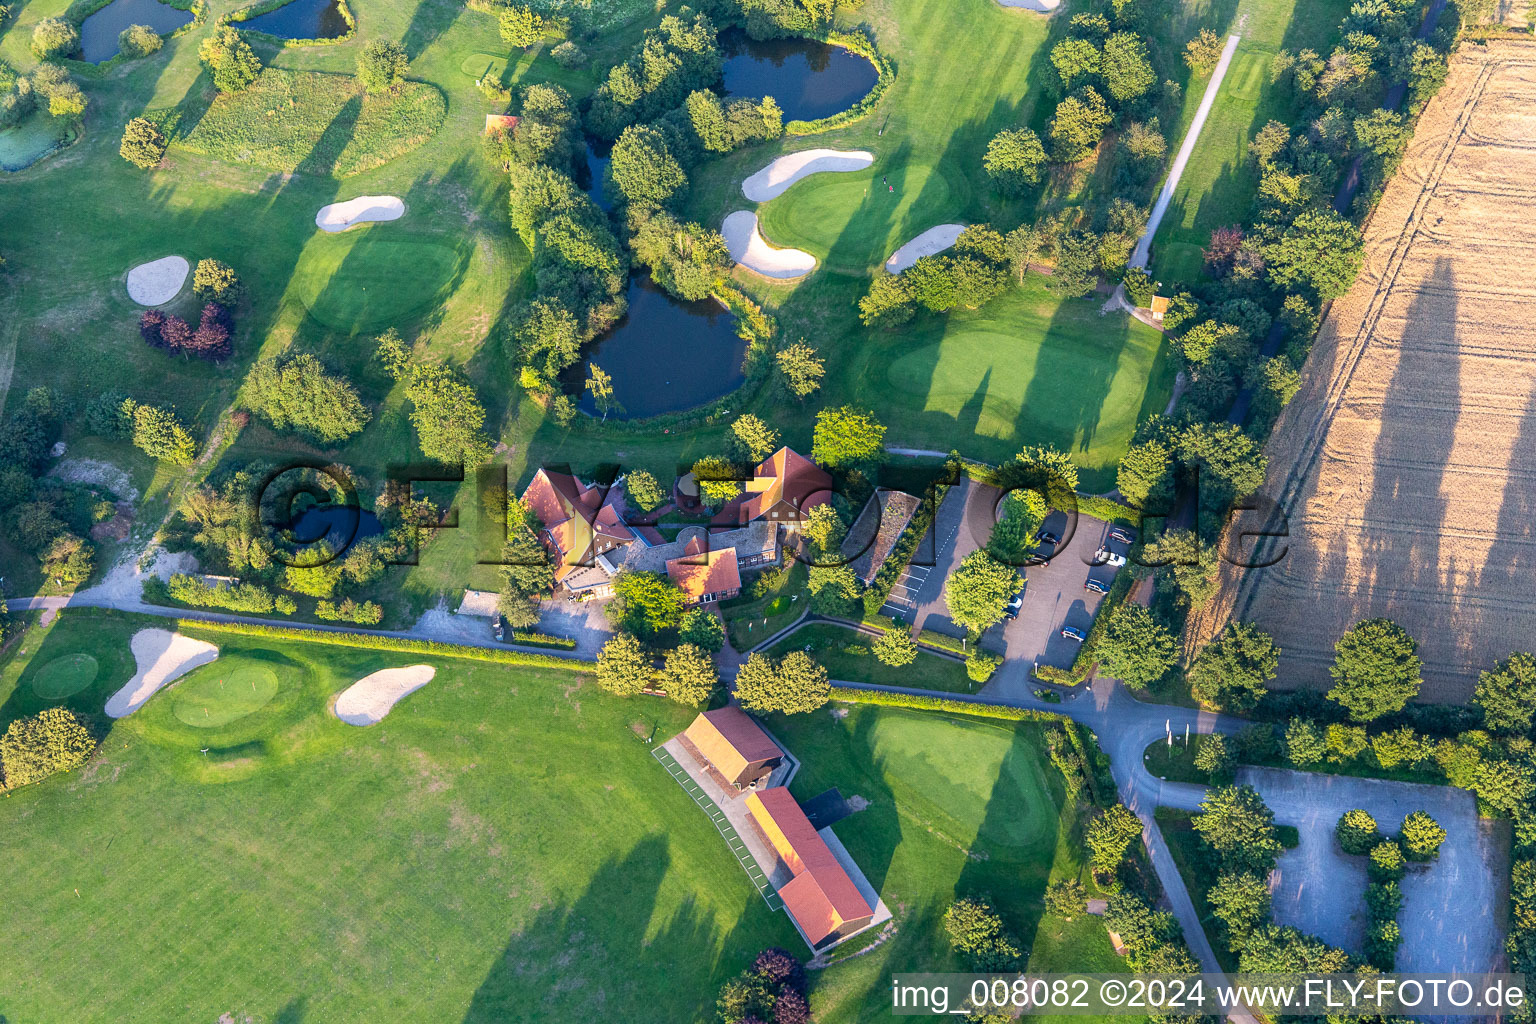 Aerial view of Grounds of the Golf course at of Golf- and Landclub Coesfeld e.V. in the district Stevede in Coesfeld in the state North Rhine-Westphalia, Germany